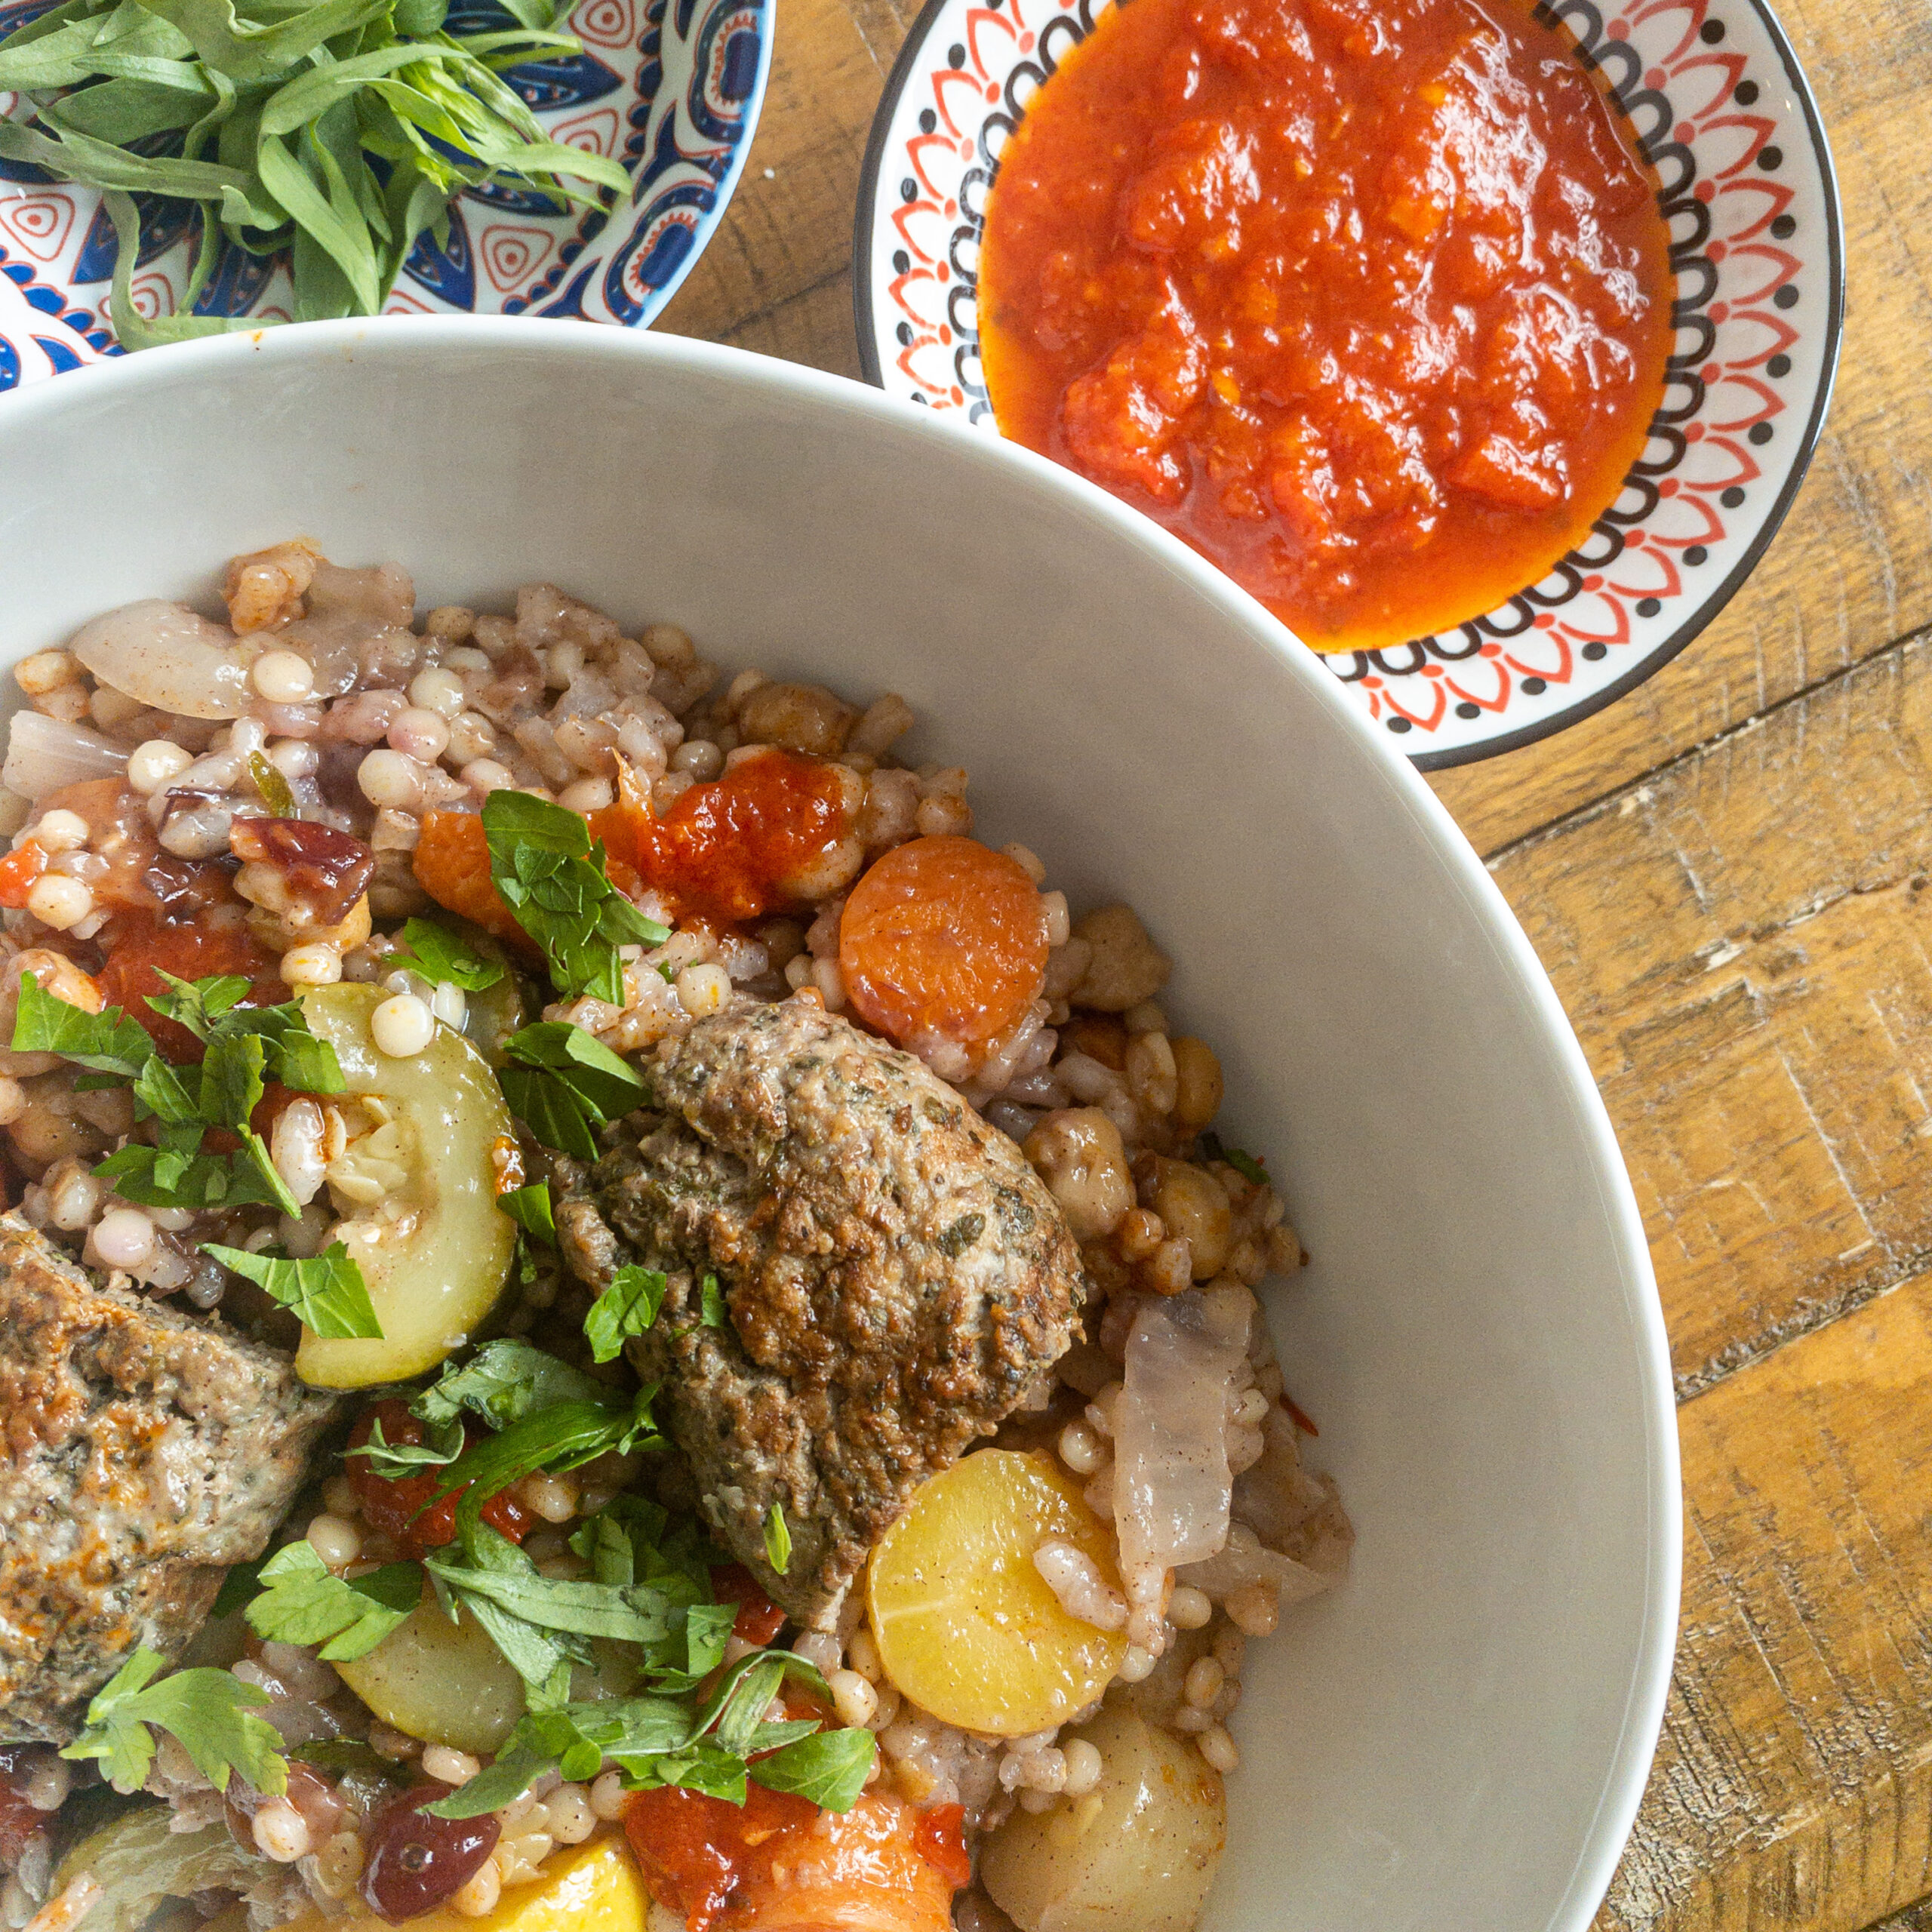 harissa couscous with veggies and lamb